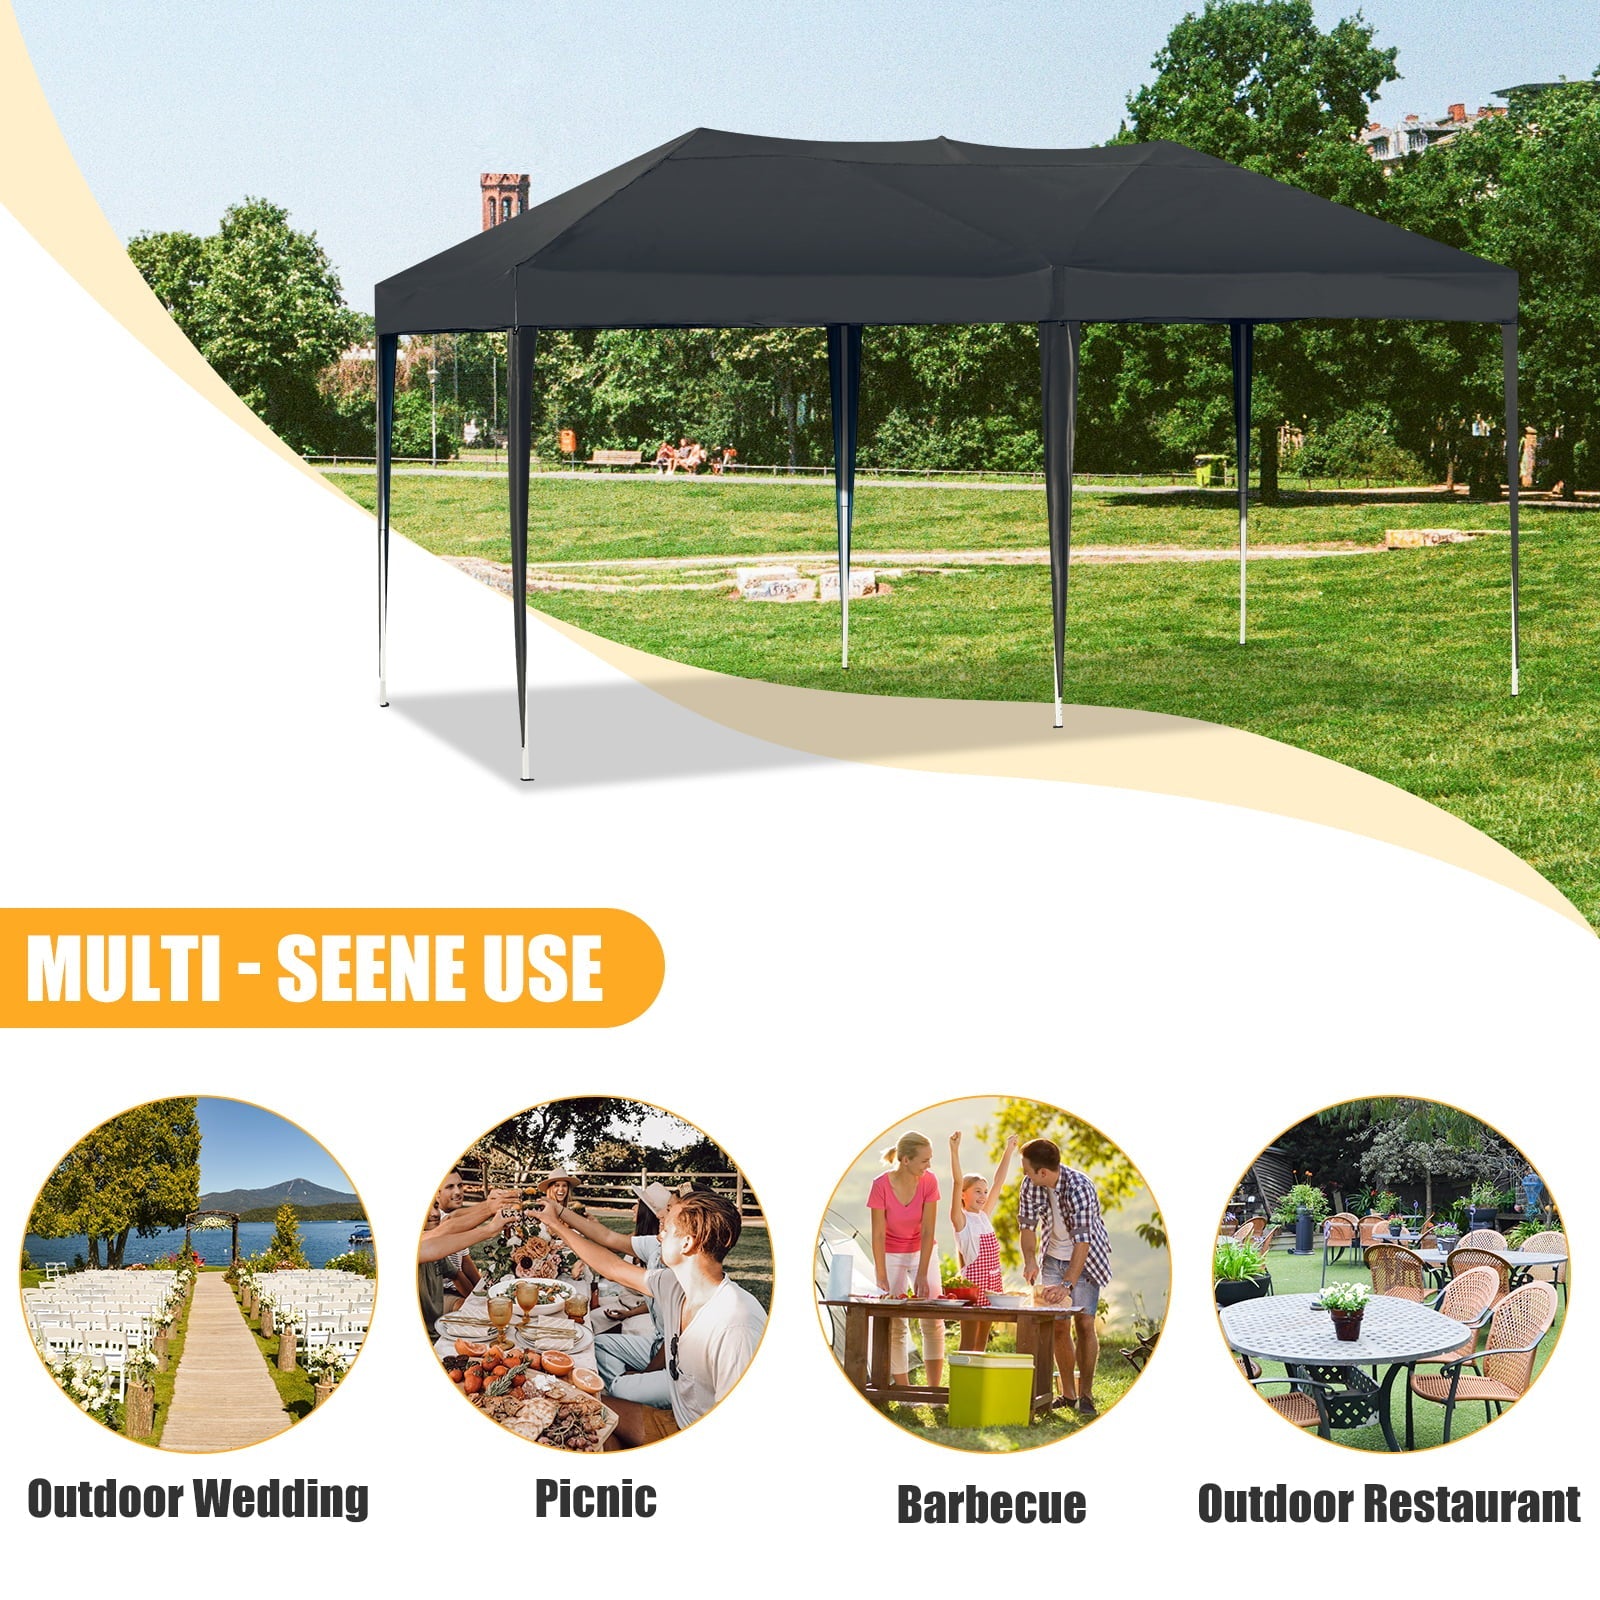 AVAWING 10 x 20 Pop Up Canopy with Sturdy Frame, Folding Patio Canopies Height Adjustable, Anti-UV & Waterproof Outdoor Canopy Tent with Portable Carry Bag for Parties, Commercial